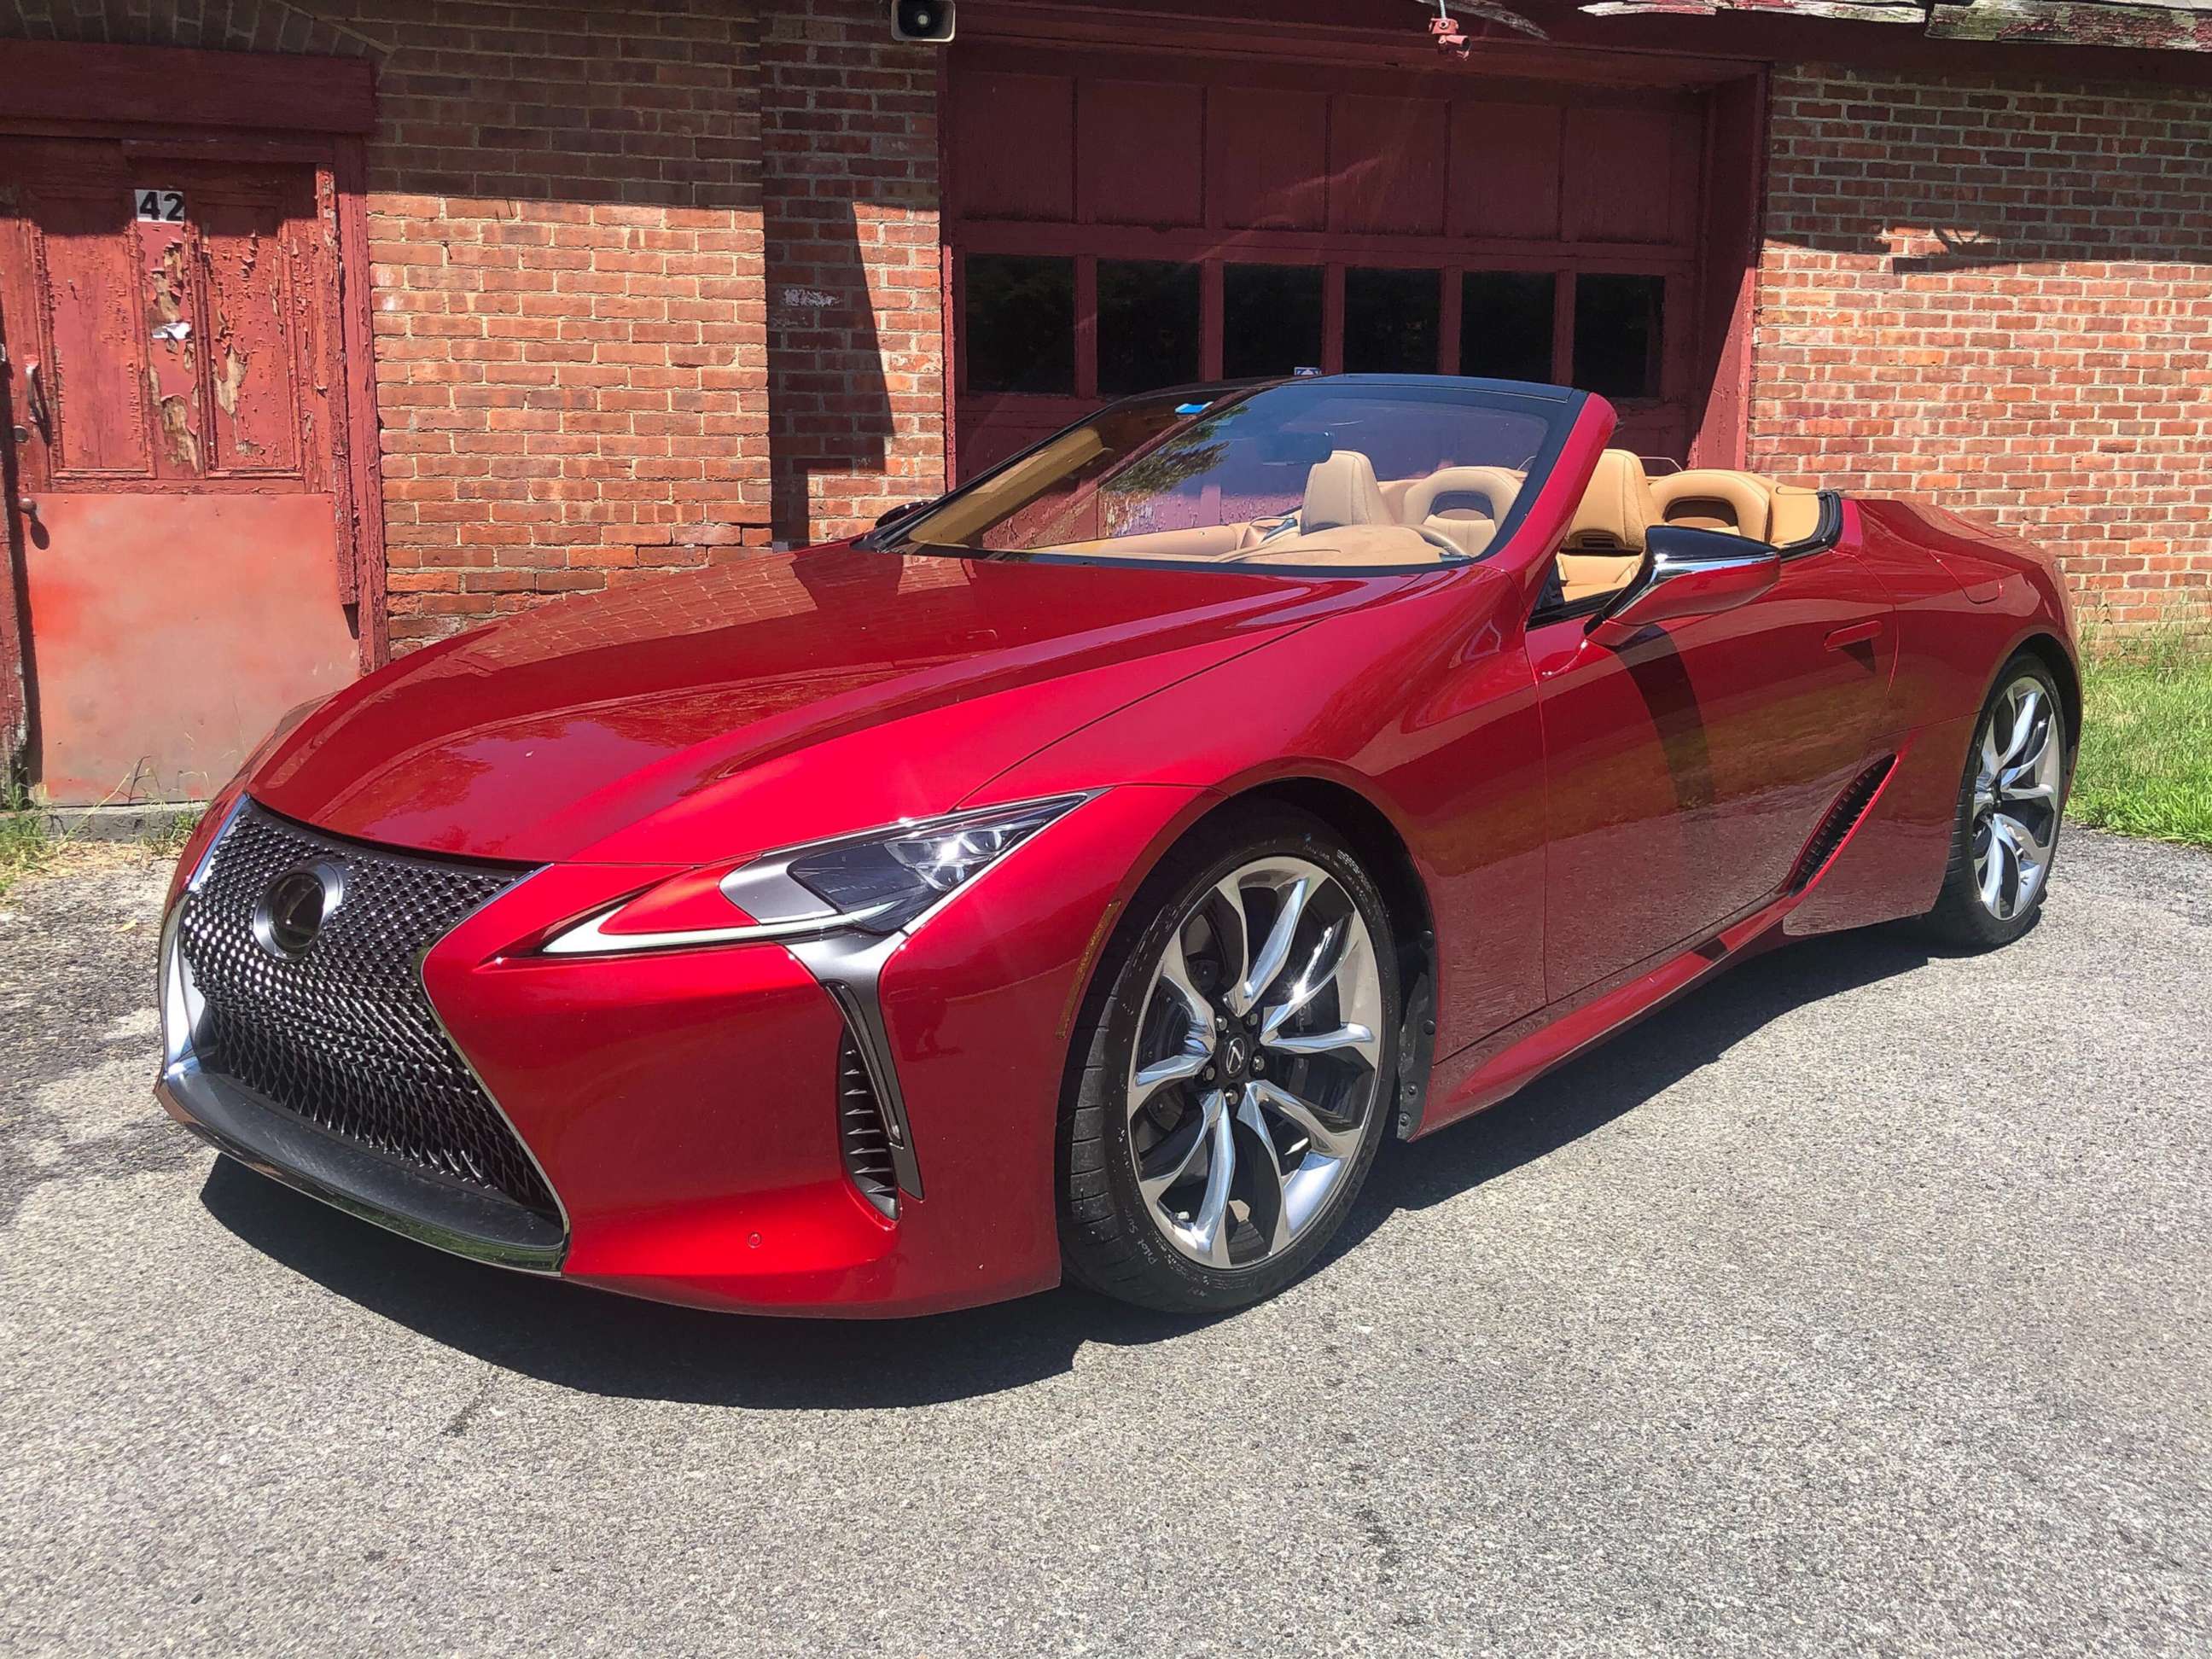 PHOTO: The LC 500 convertible, a performance luxury car from Lexus, went on sale in July 2020.